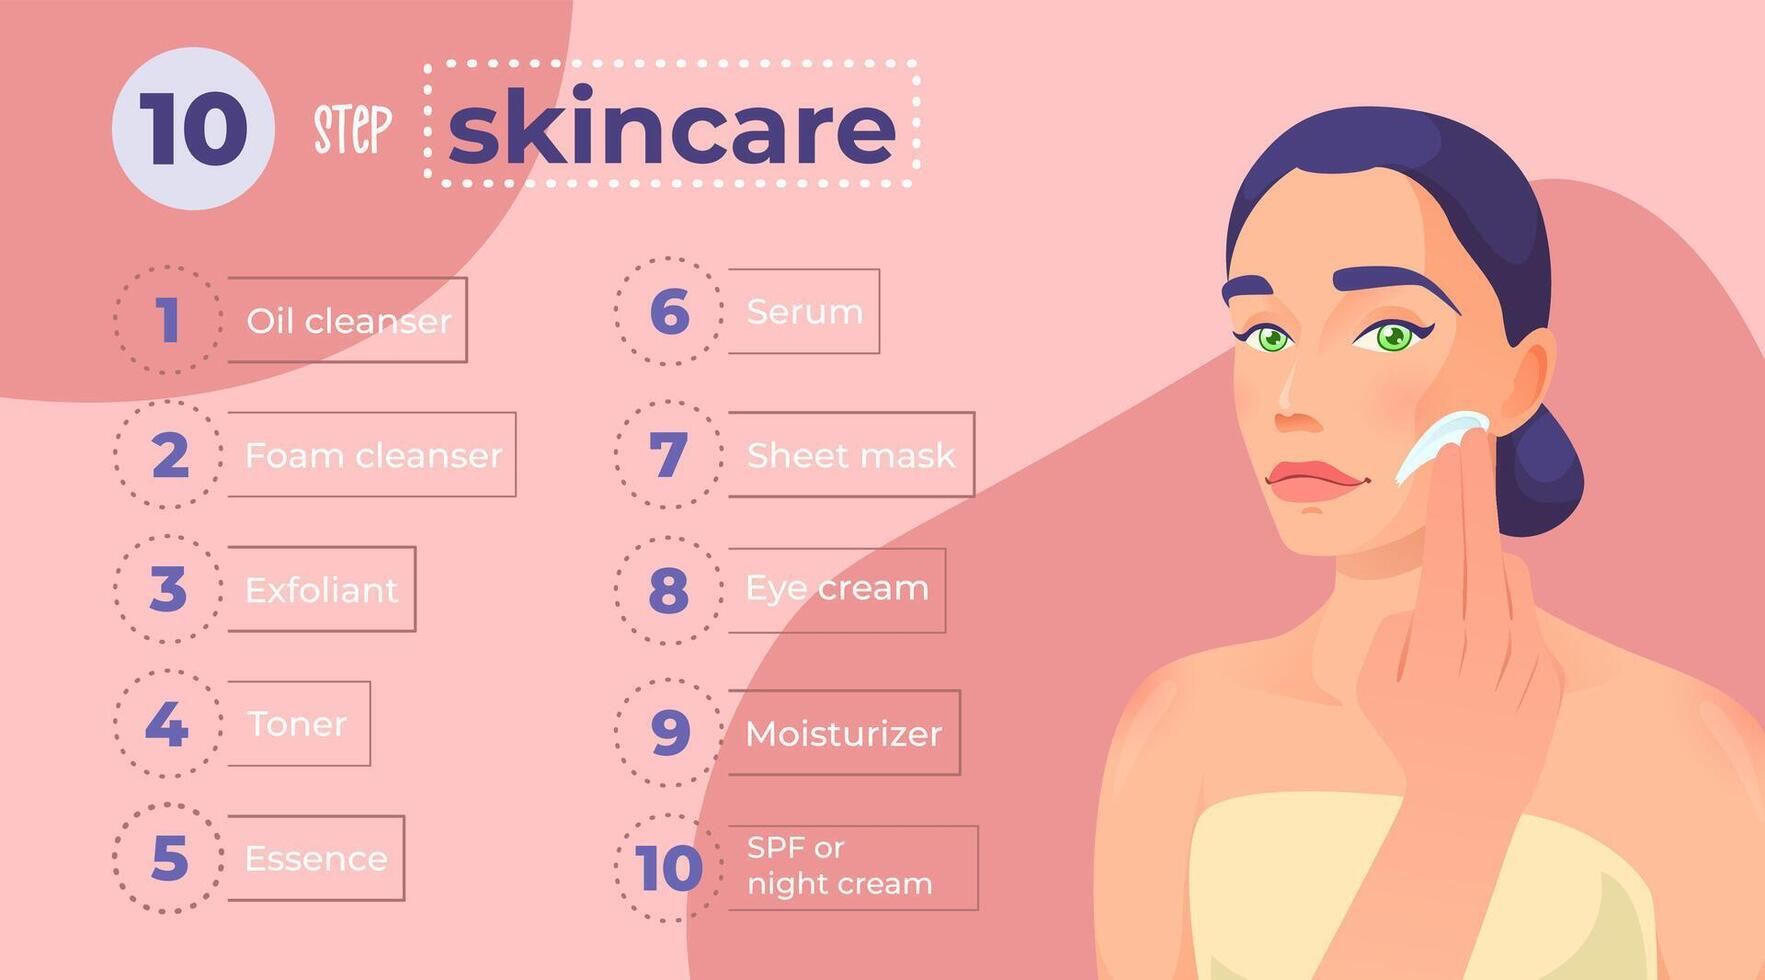 Ten step skincare routine for beautiful skin with cosmetic products. Infographic, poster with beautiful woman. Colorful vector illustration template.